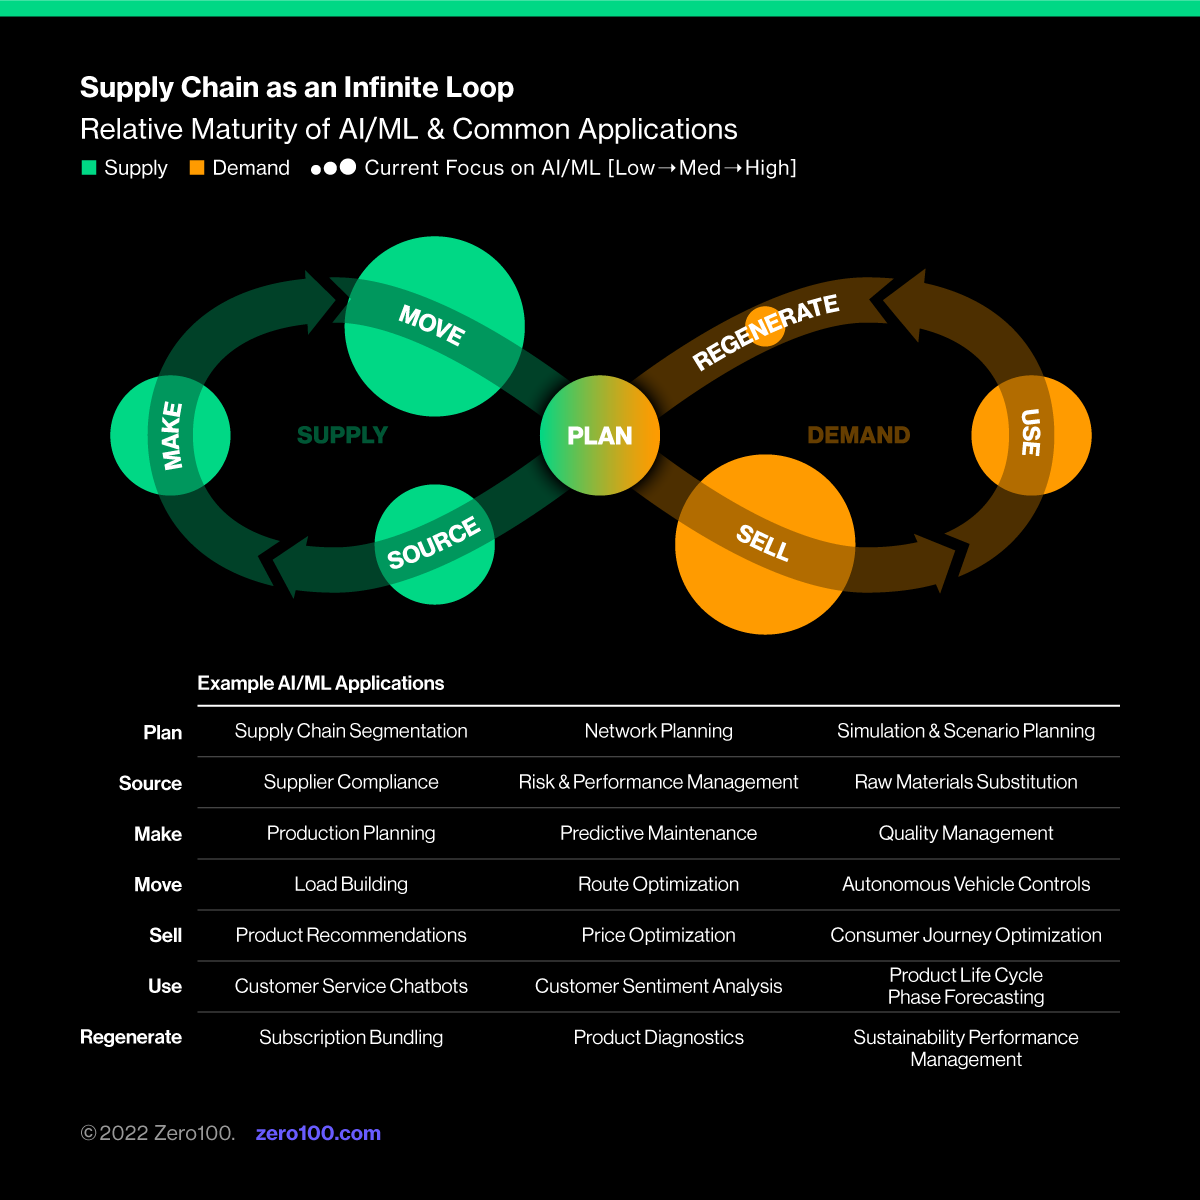 An image depicting supply chain as ain infinite loop. Source: Zero100.